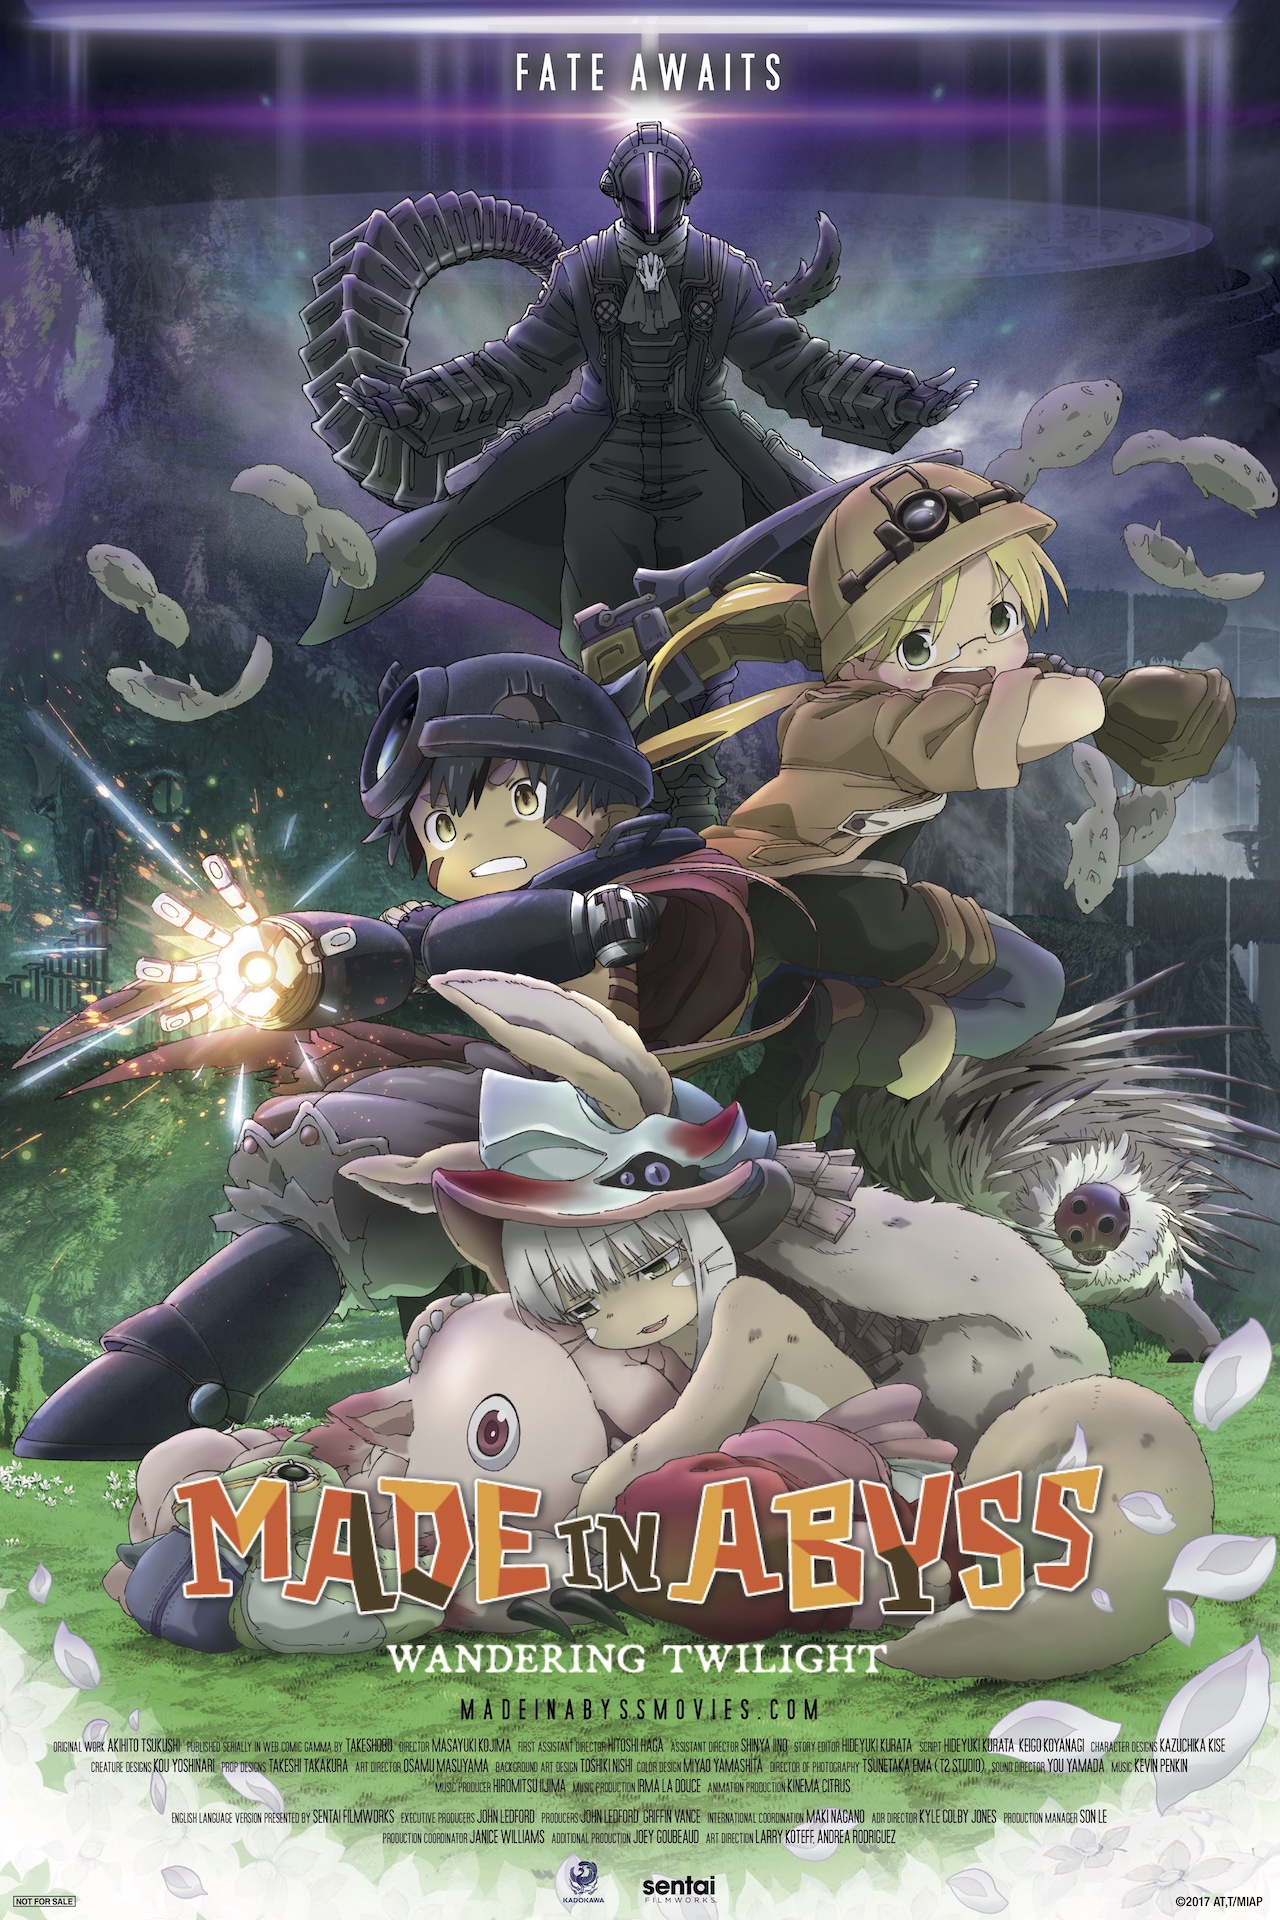 ANIME/FILM REVIEW, A Masterfully Deep Adventure In Third Made In Abyss  Film - B3 - The Boston Bastard Brigade